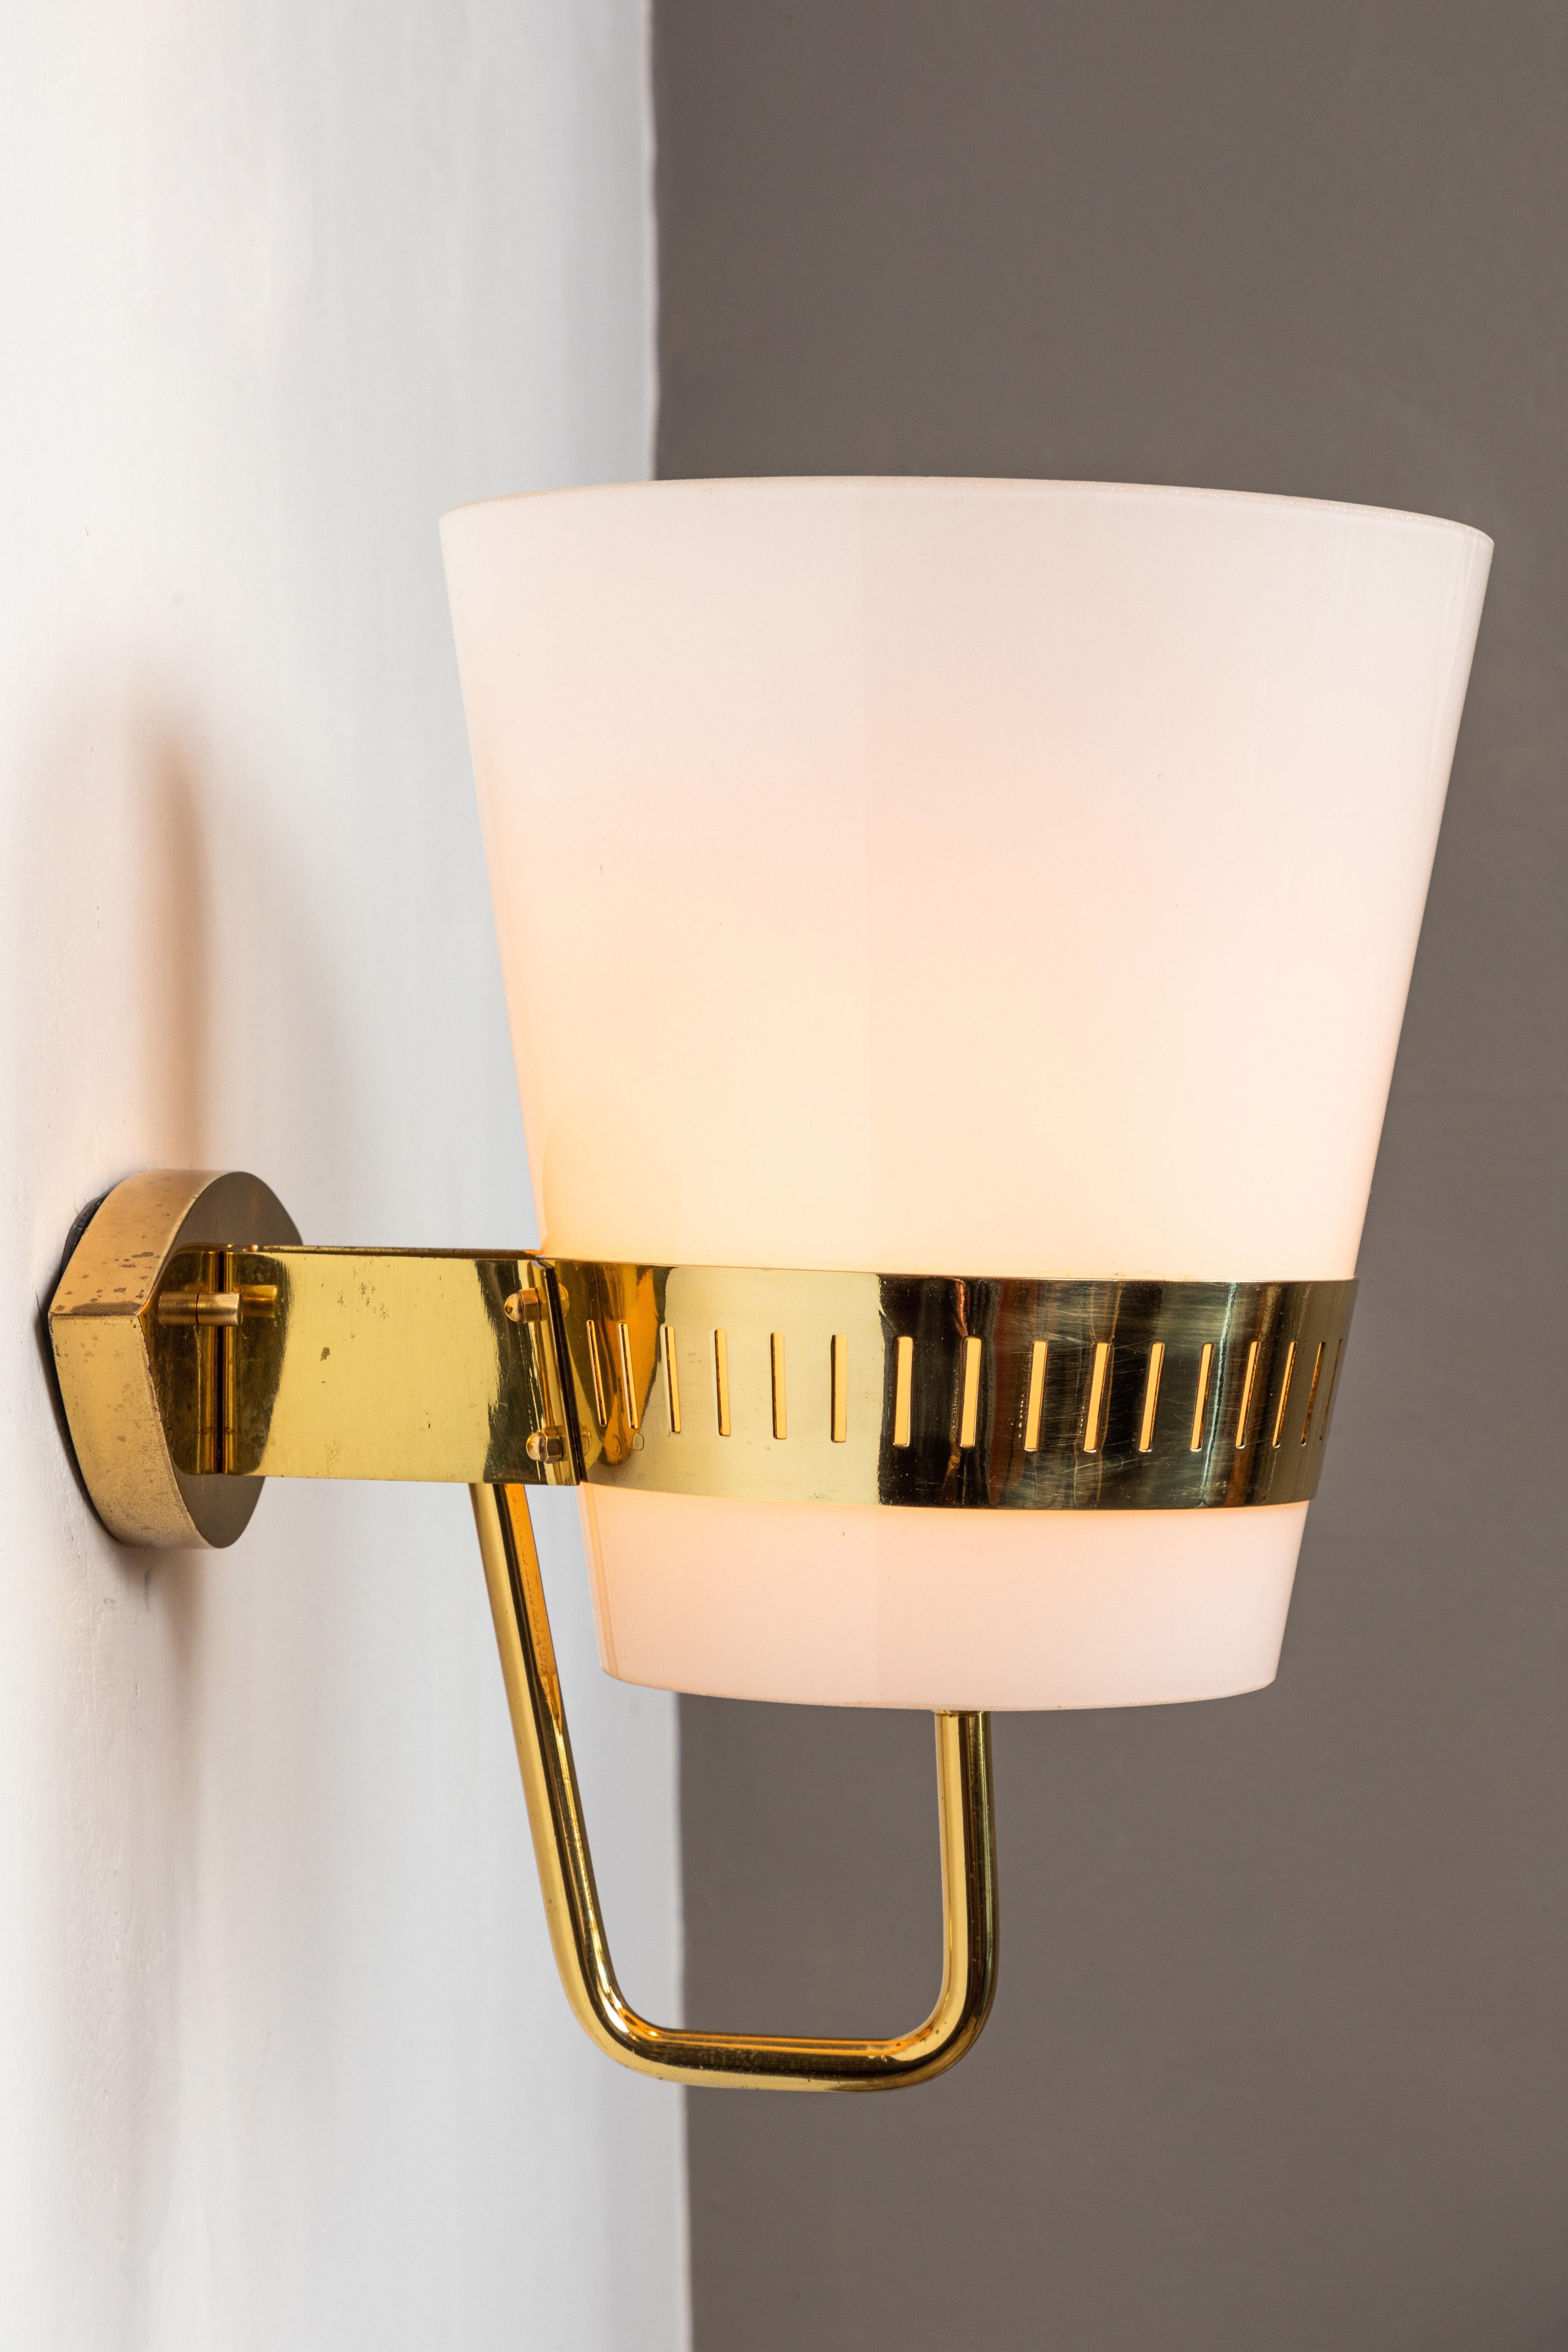 Large 1950s Stilnovo brass and glass sconce. Executed in brass and thick opaline glass, with original unmodified cat eye shaped sculptural Italian brass backplate. A sculptural and refined design of attractive scale that is in many ways